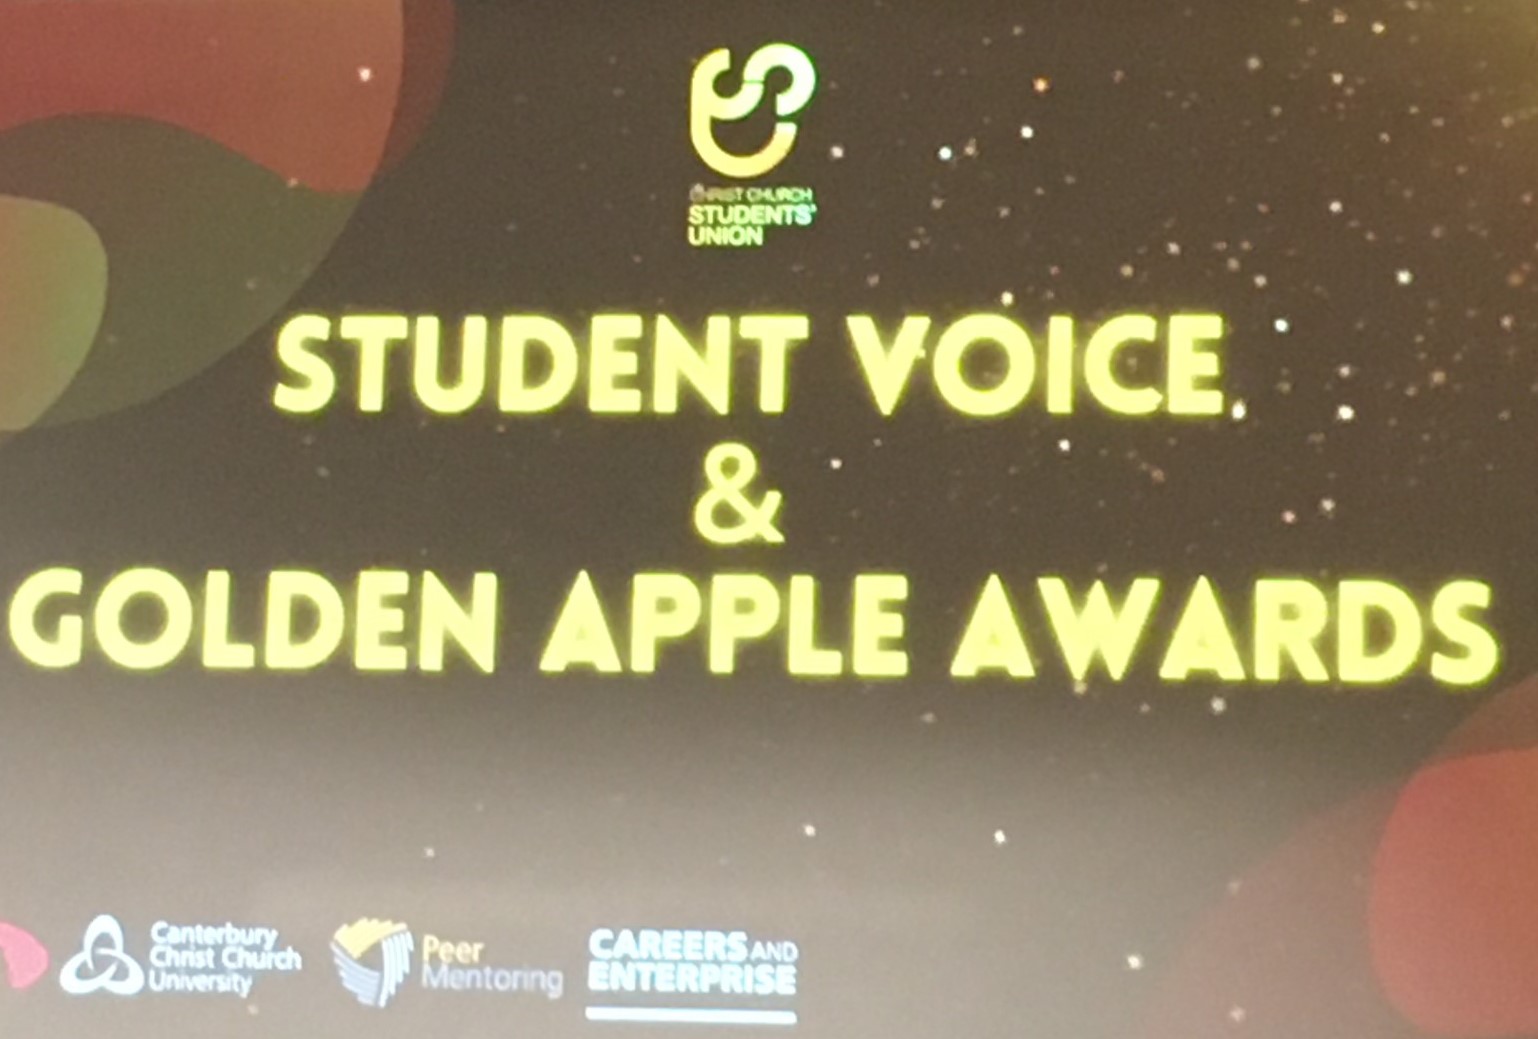 News from the Golden Apple Awards 2023